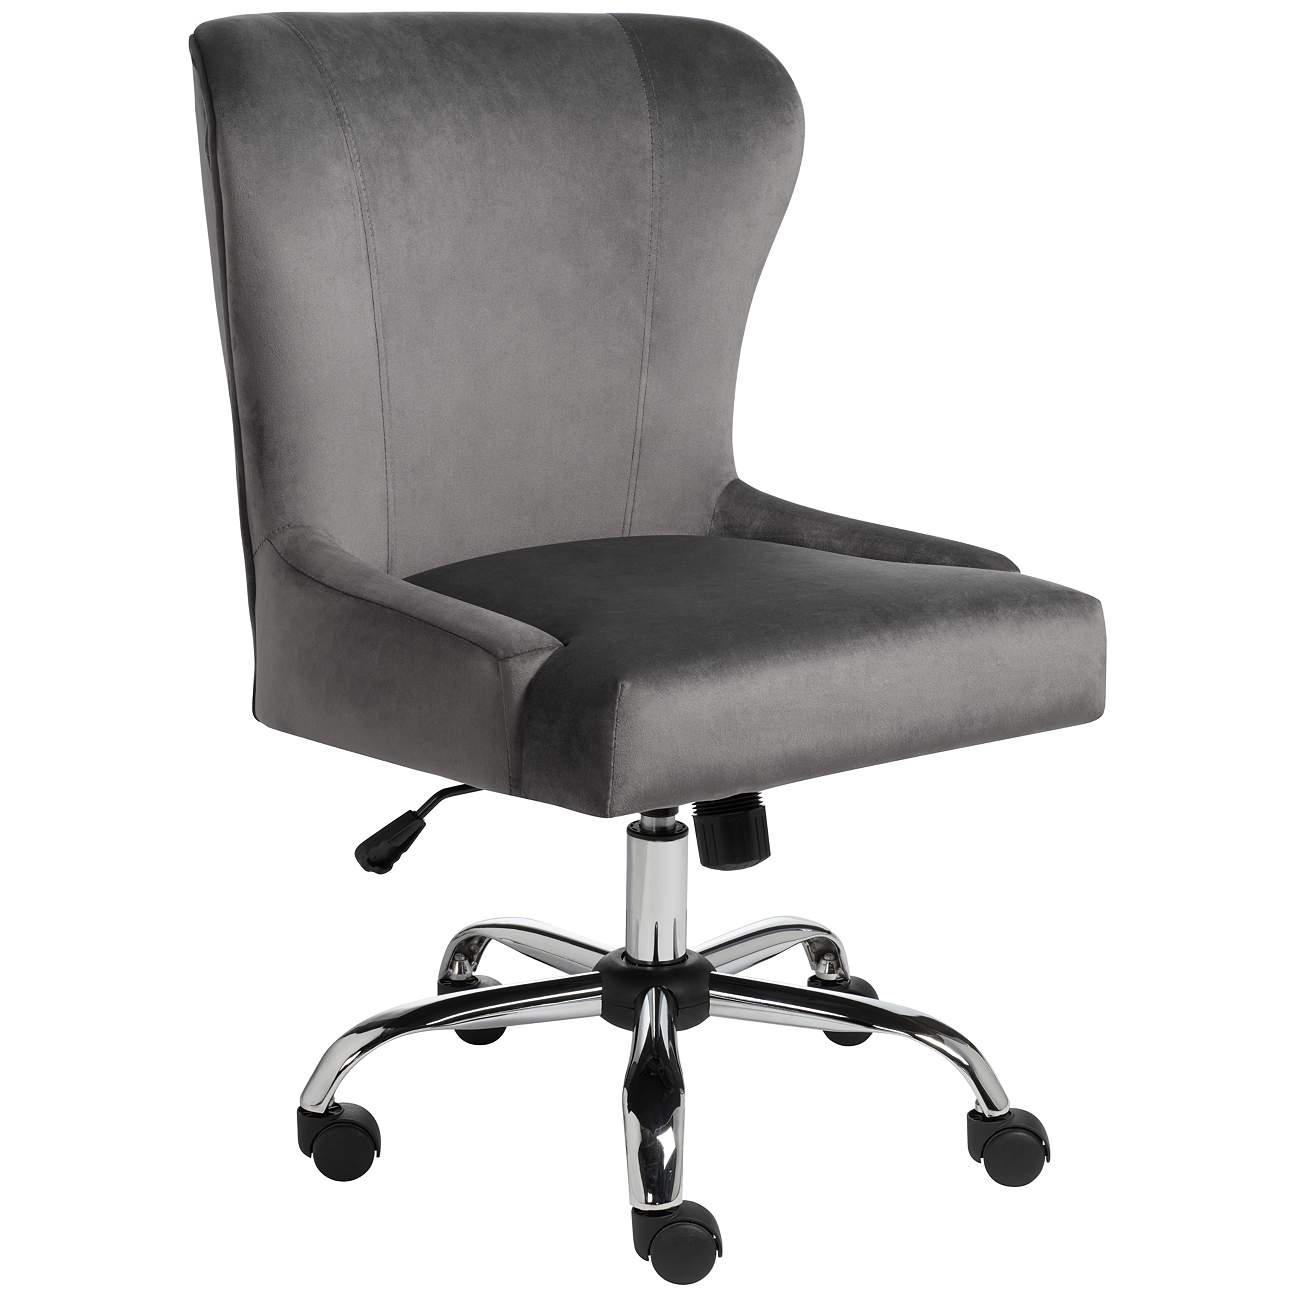 Erin Gray Fabric Adjustable Office Chair - #78J26 | Lamps Plus